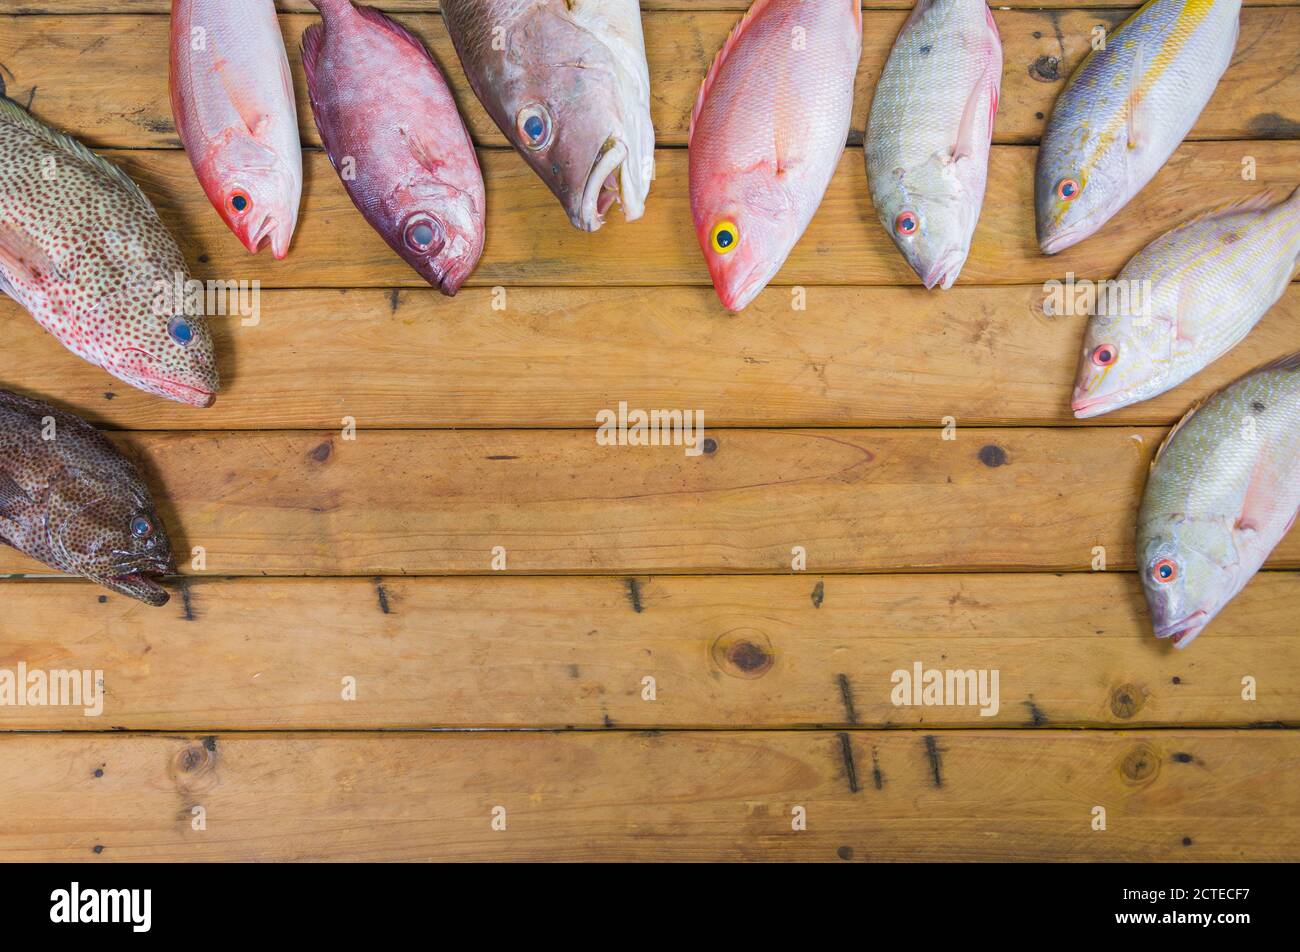 Caribbean Fresh fish seafood on old wooden table. Top view. Close-up. Stock Photo